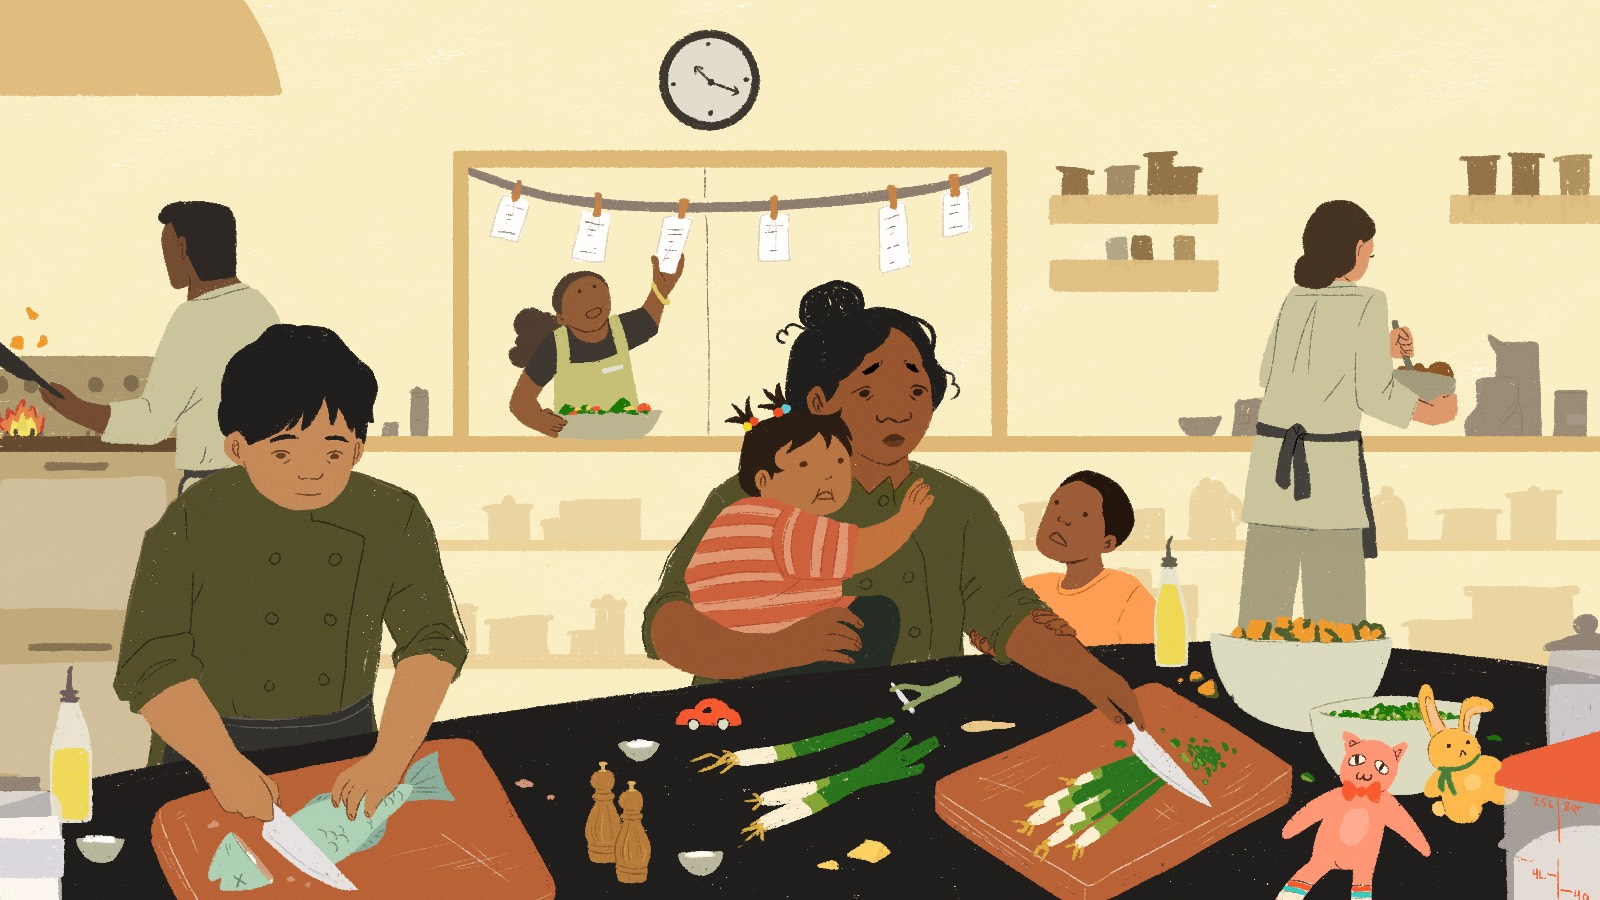 An illustration of a woman with two children chopping green onions in a busy restaurant kitchen 